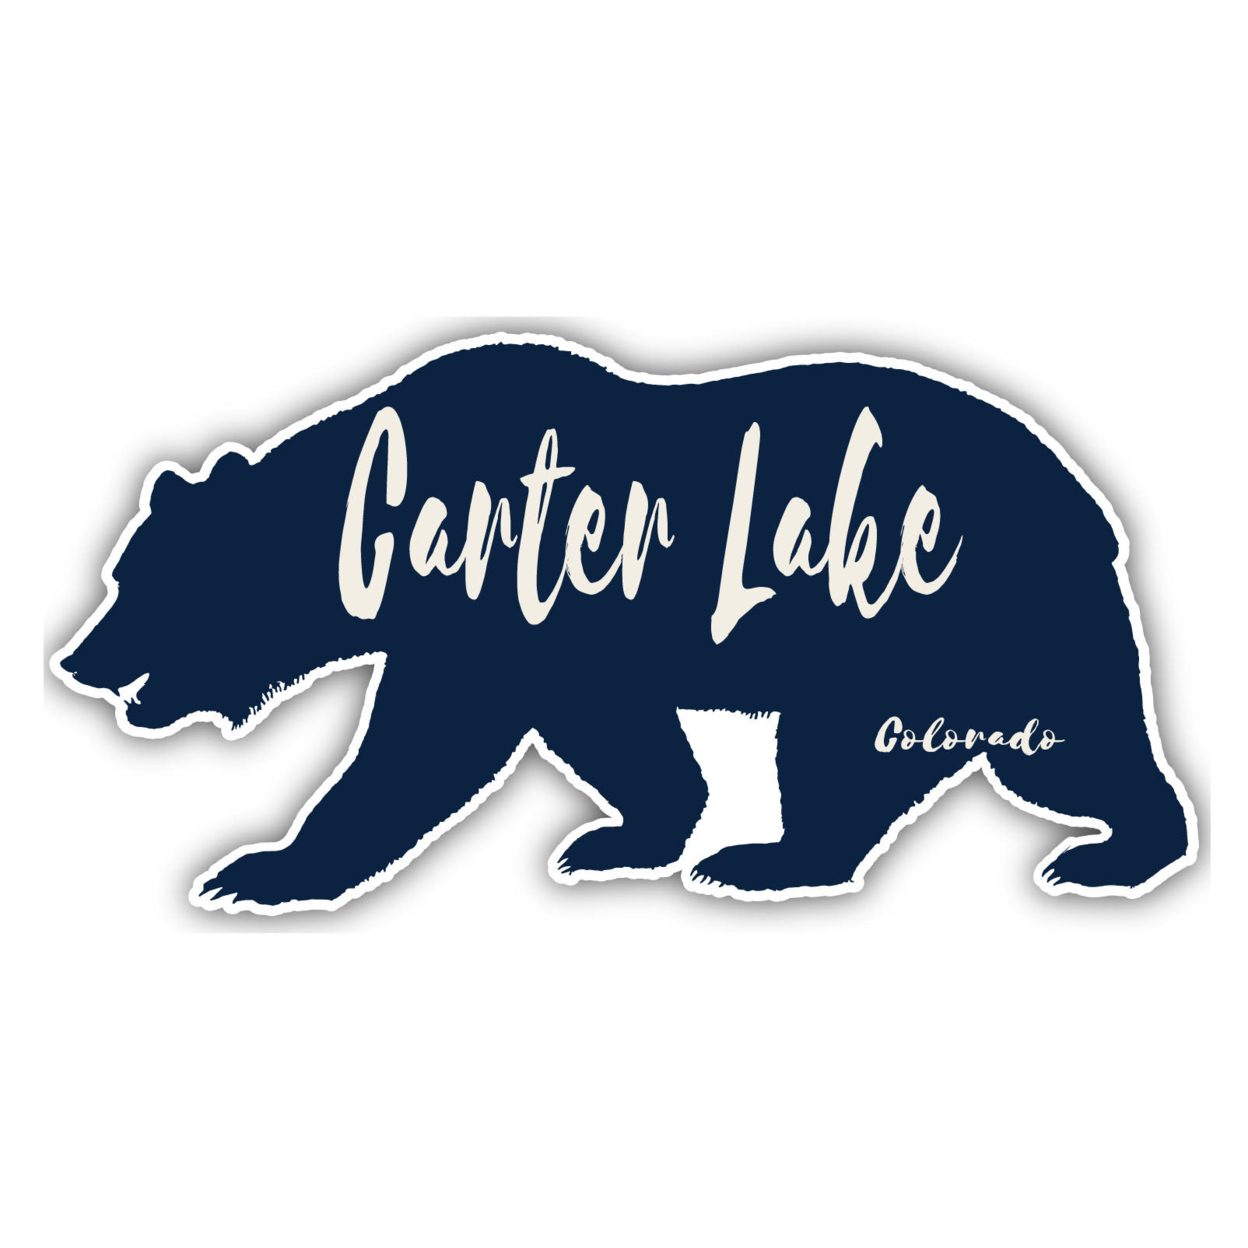 Carter Lake Colorado Souvenir Decorative Stickers (Choose Theme And Size) - 4-Pack, 6-Inch, Camp Life